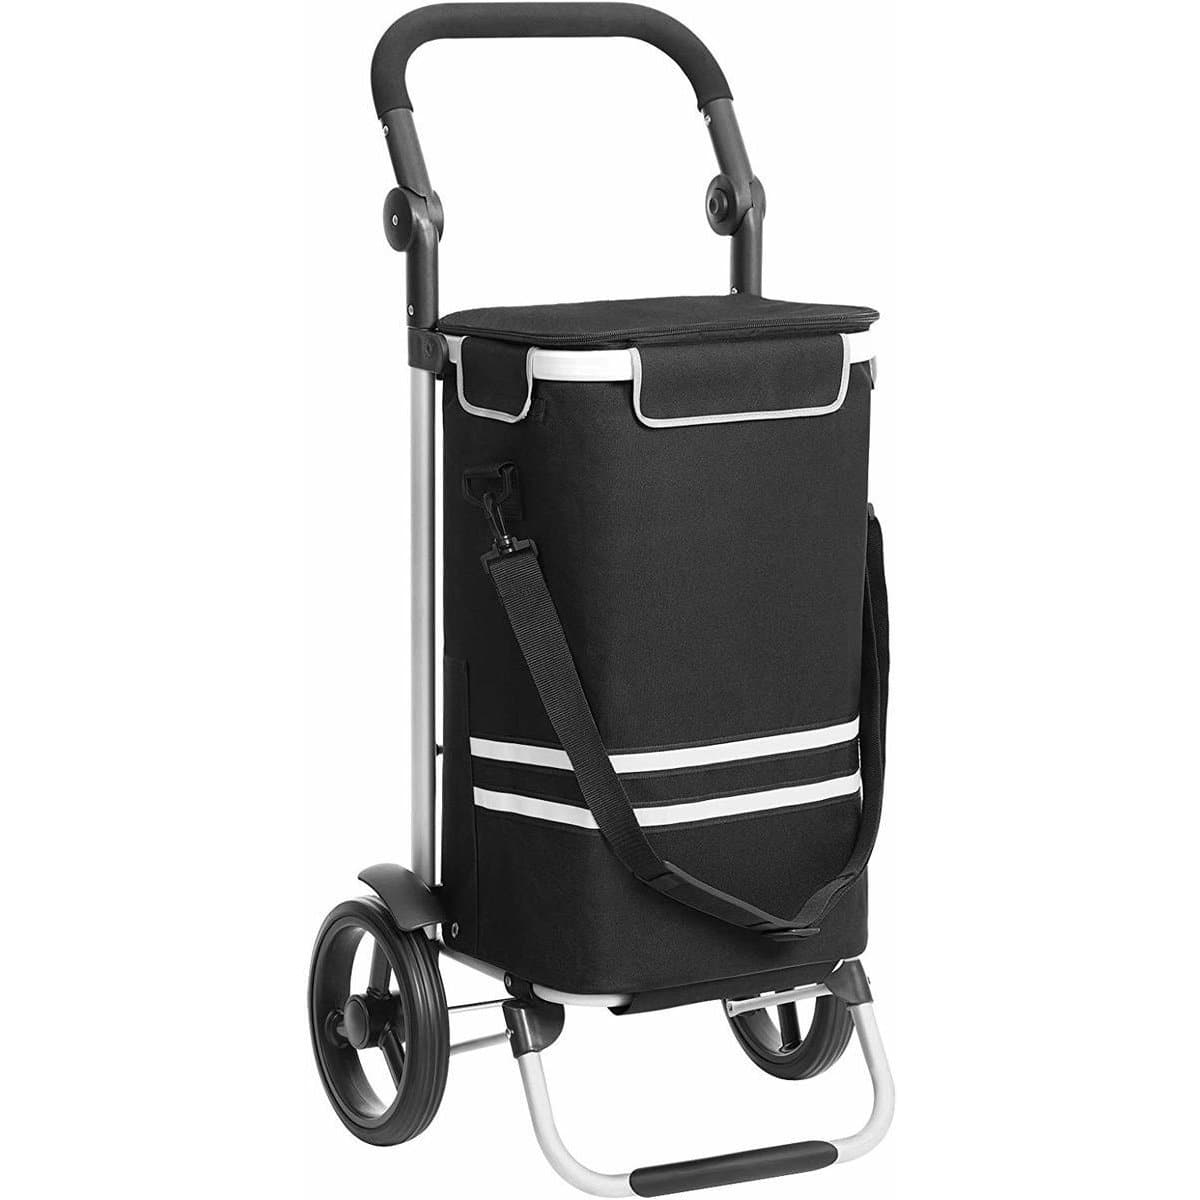 Nancy's Foldable Shopping Trolley - Shopping Trolleys with Wheels - Shopping Cart with Cooling